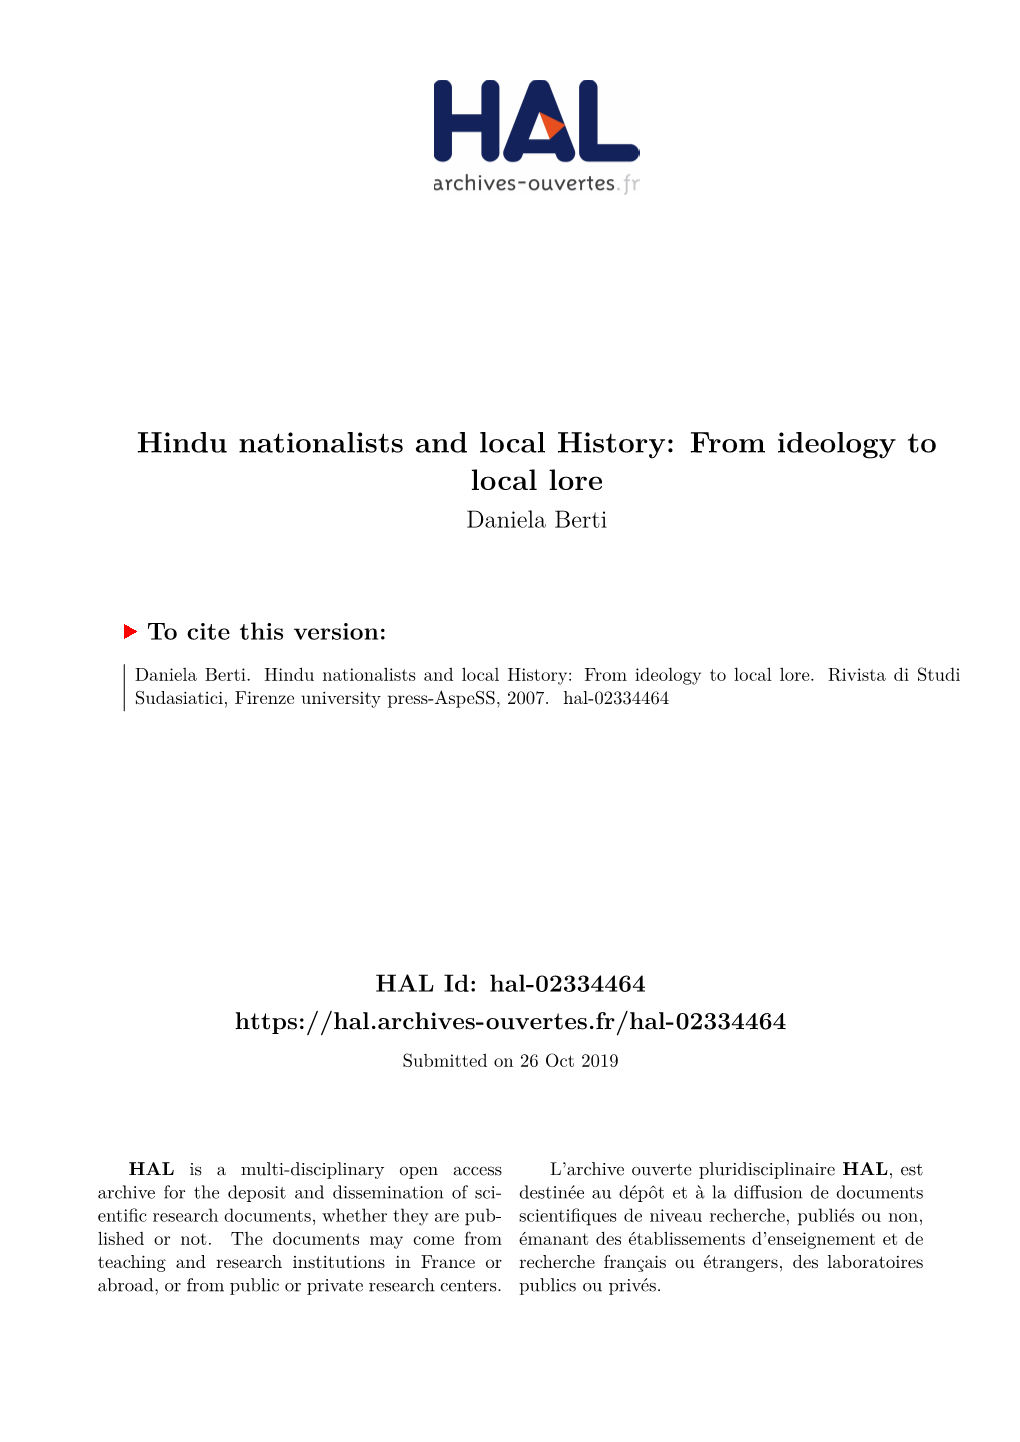 Hindu Nationalists and Local History: from Ideology to Local Lore Daniela Berti